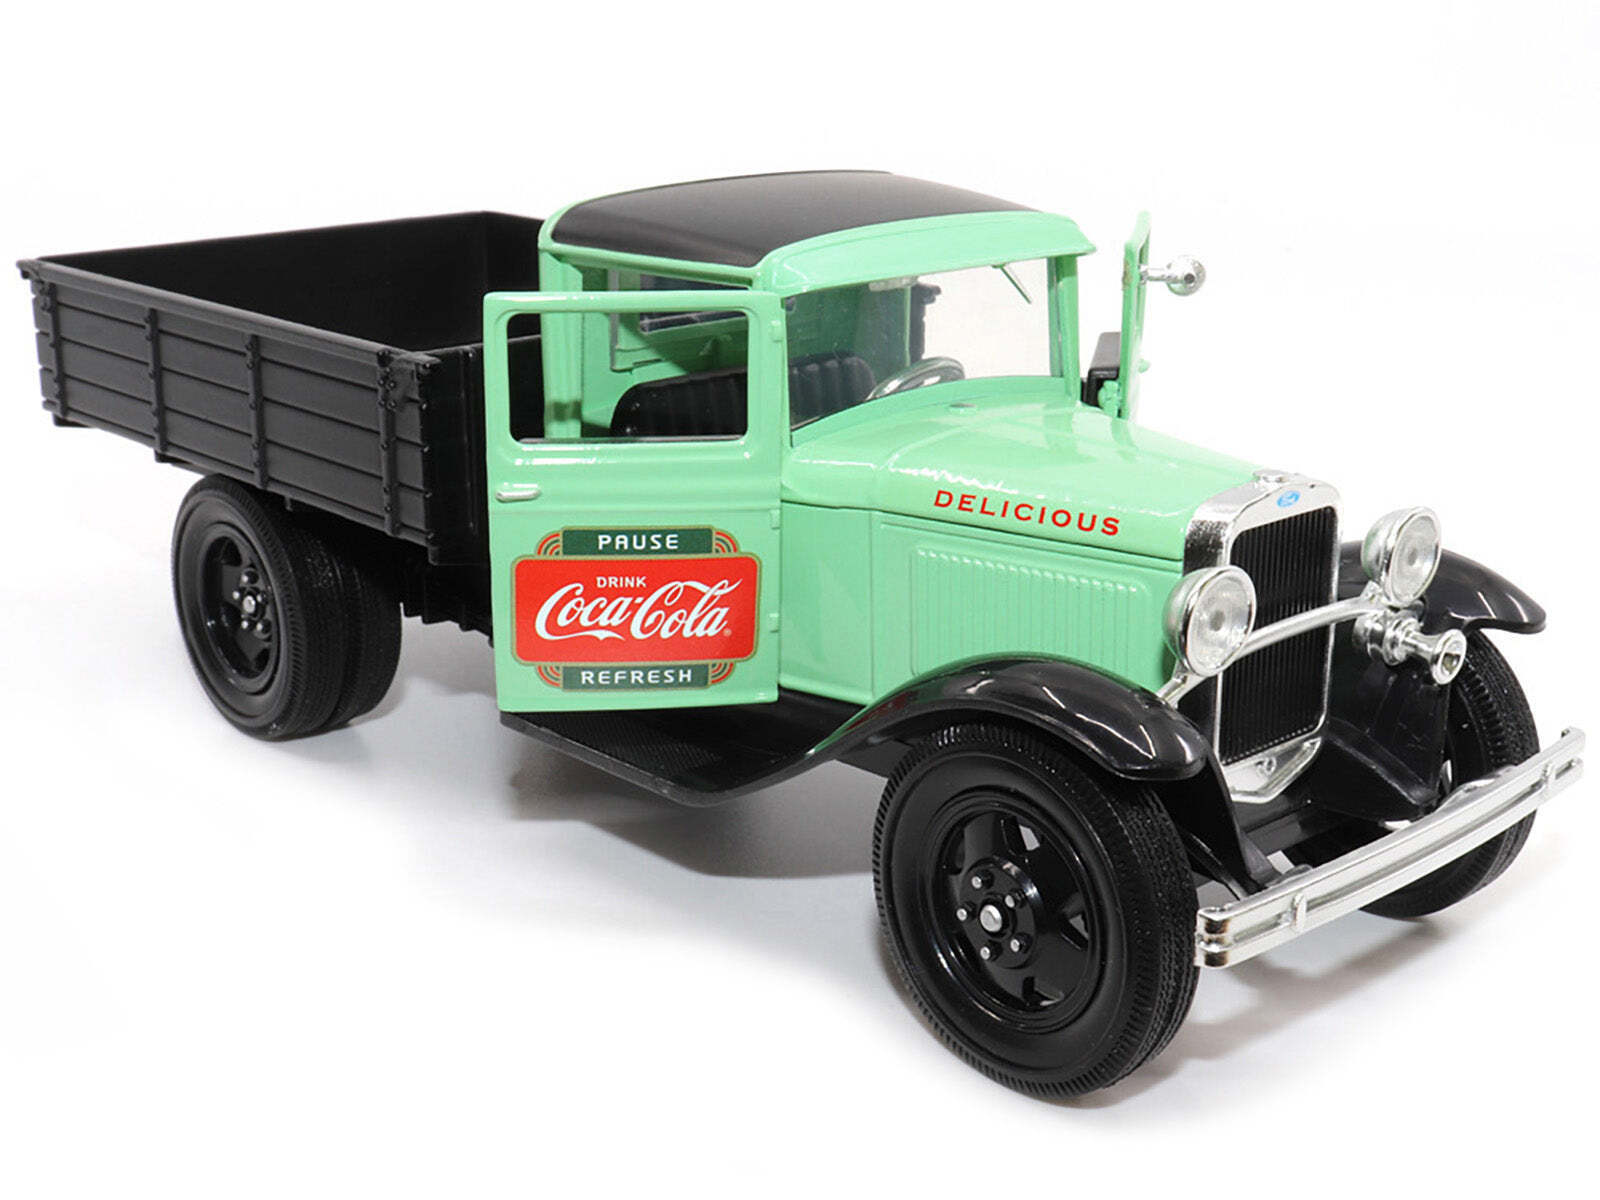 1931 Ford Model AA Pickup Truck Pause Refresh Drink Coca-Cola 1/24 Diecast Car